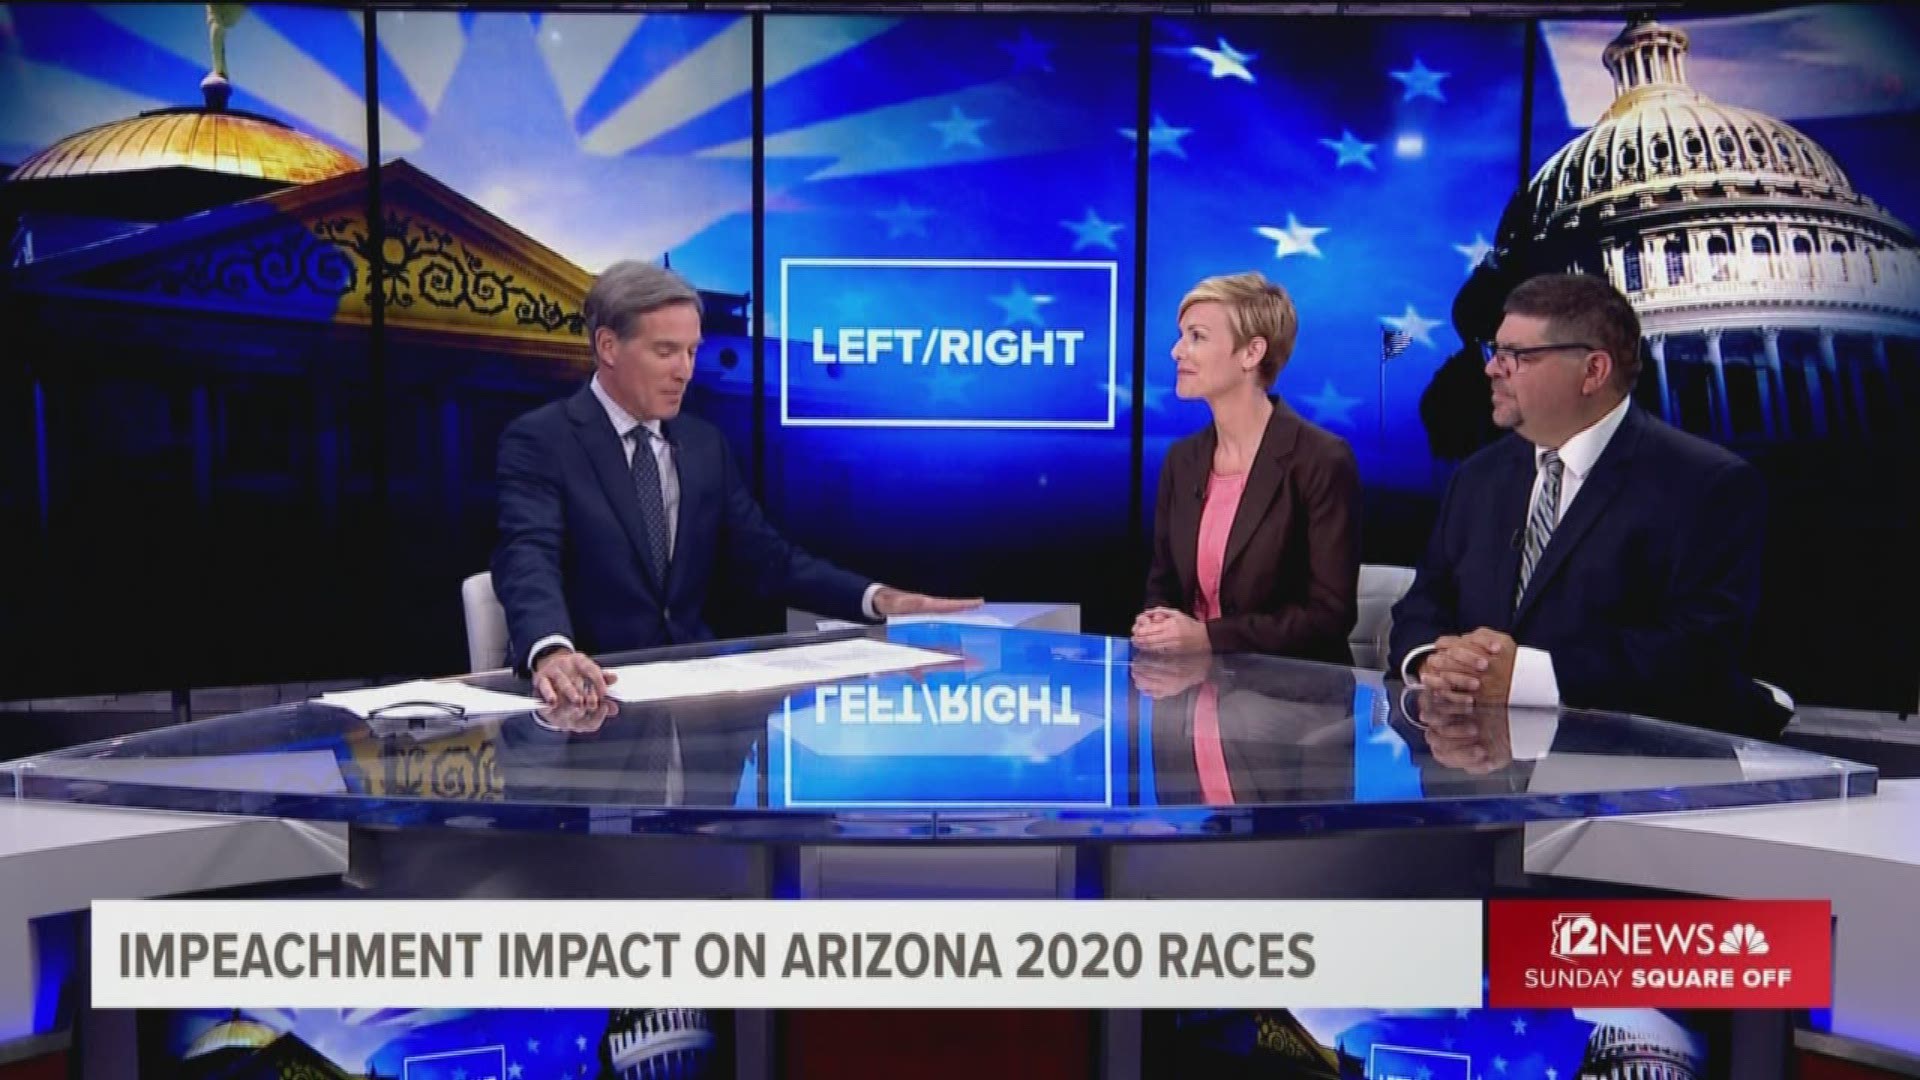 In our Left/Right debate, Julie Erfle and Barrett Marson discuss the impeachment inquiry’s potential impact on Arizona’s 2020 vote.